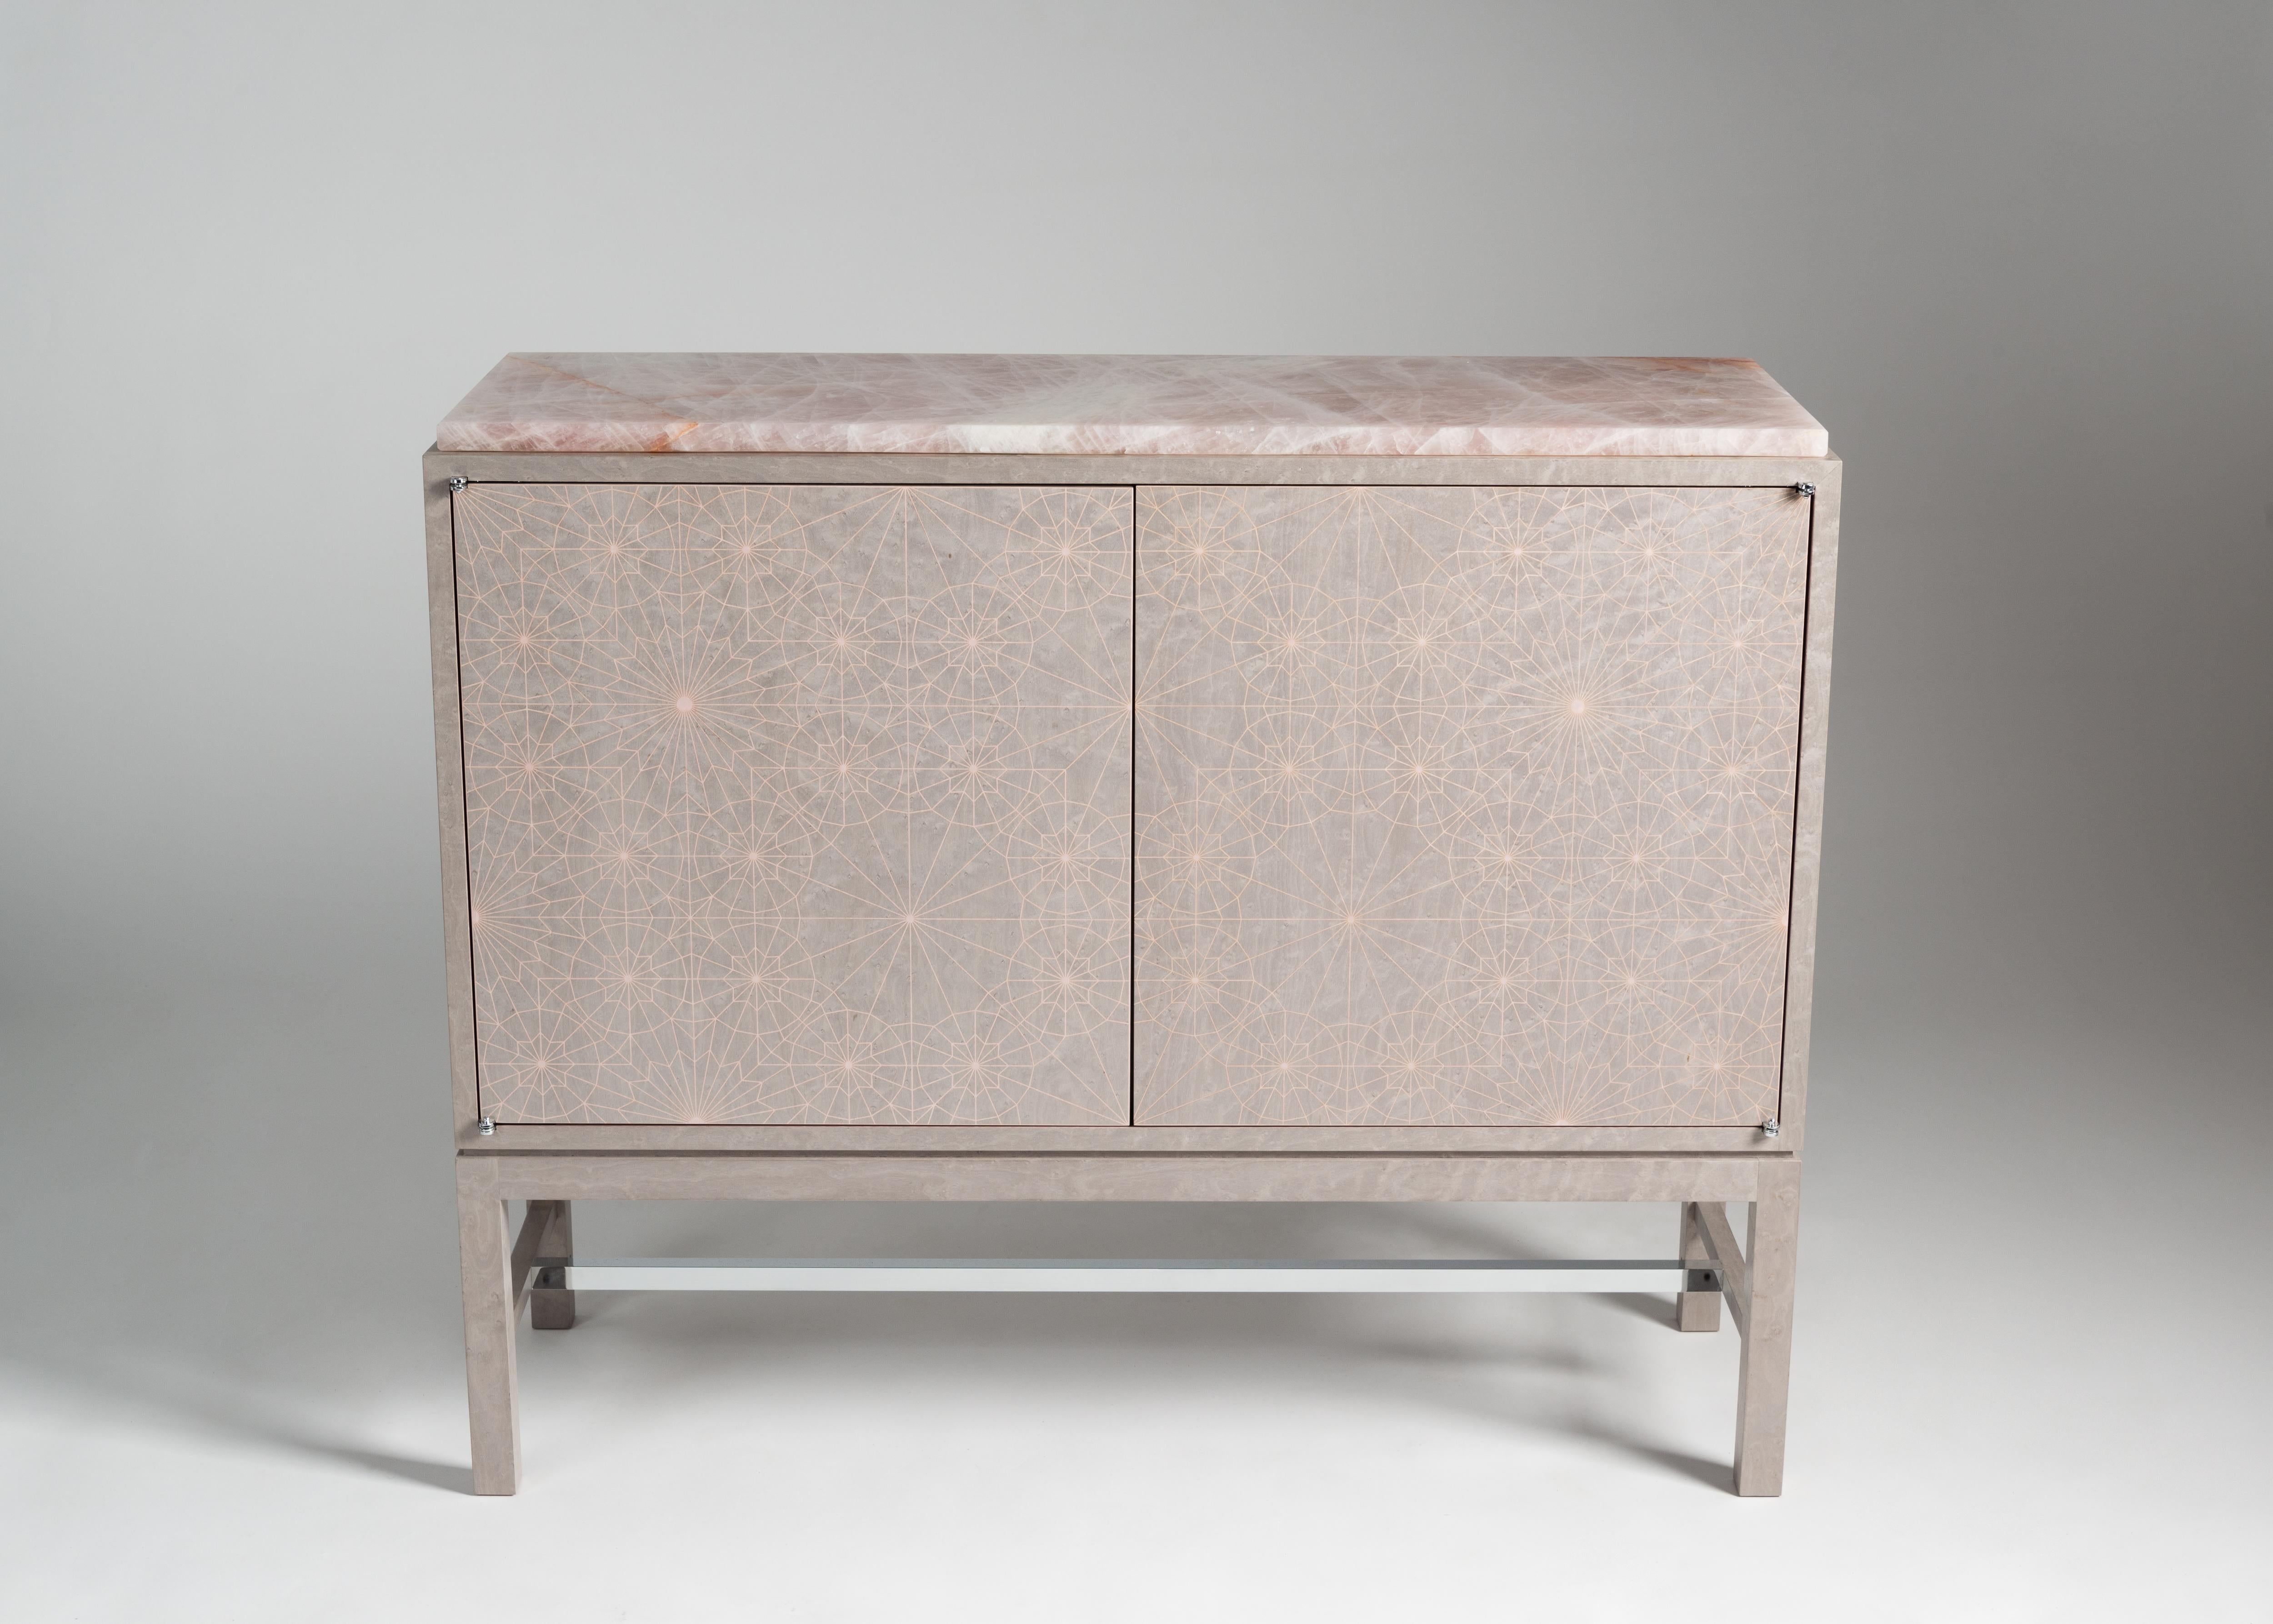 Zelouf & Bell’s two-door constellation cabinet in a dusty pink-infused grey bird’s eye maple features a delicate web of tone-on-tone marquetry in pink ripple sycamore, a secondary top in rose quartz, and a pink ripple sycamore interior with shelves